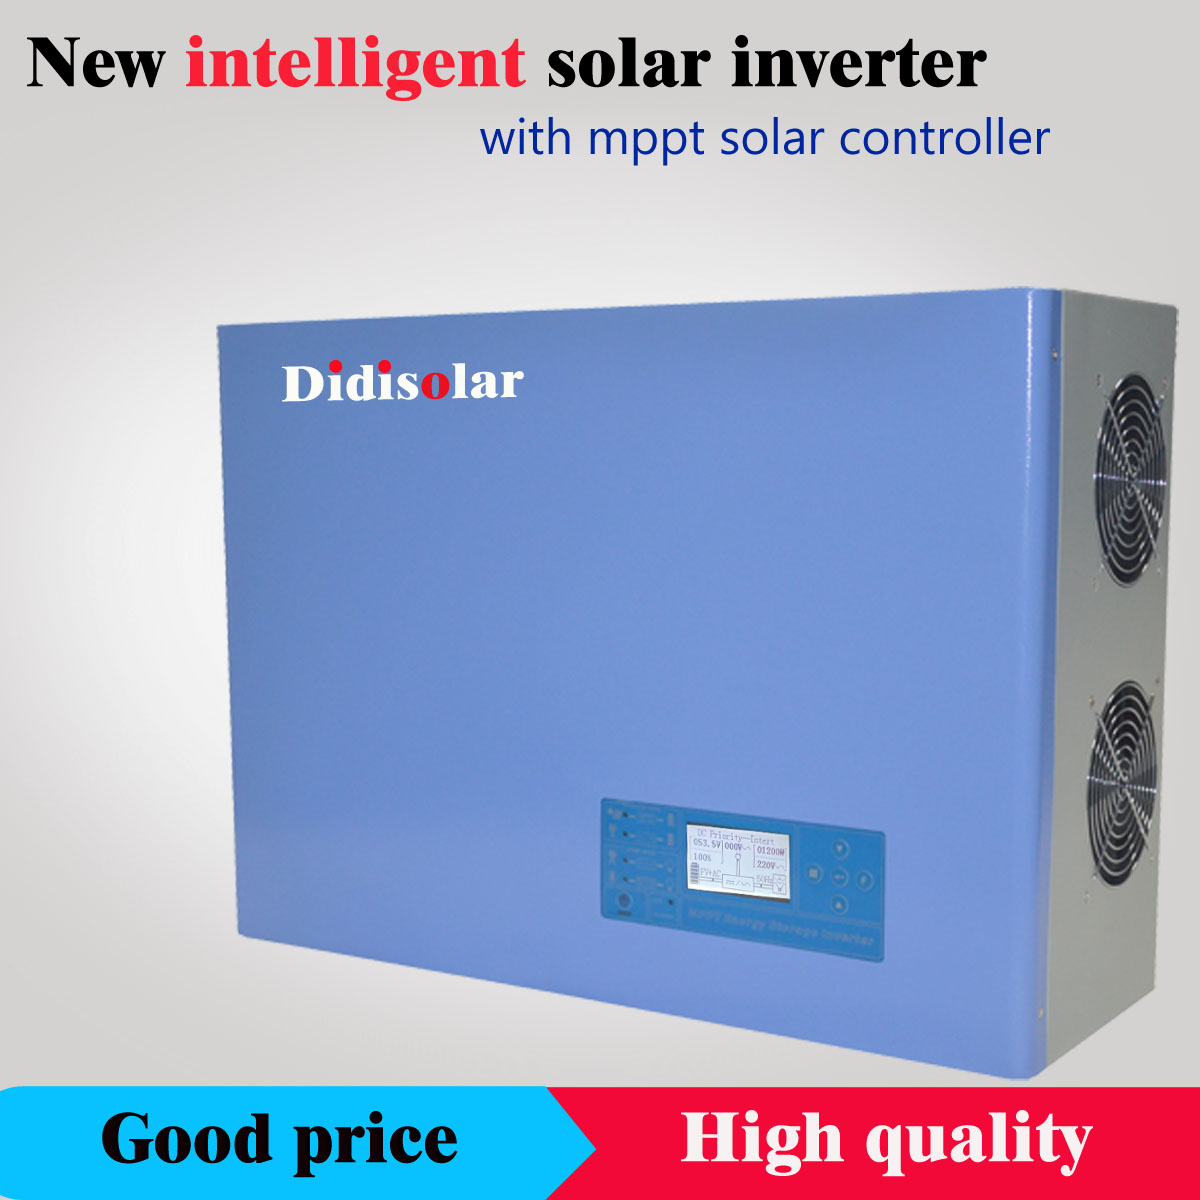 How to view the fault record of solar inverter